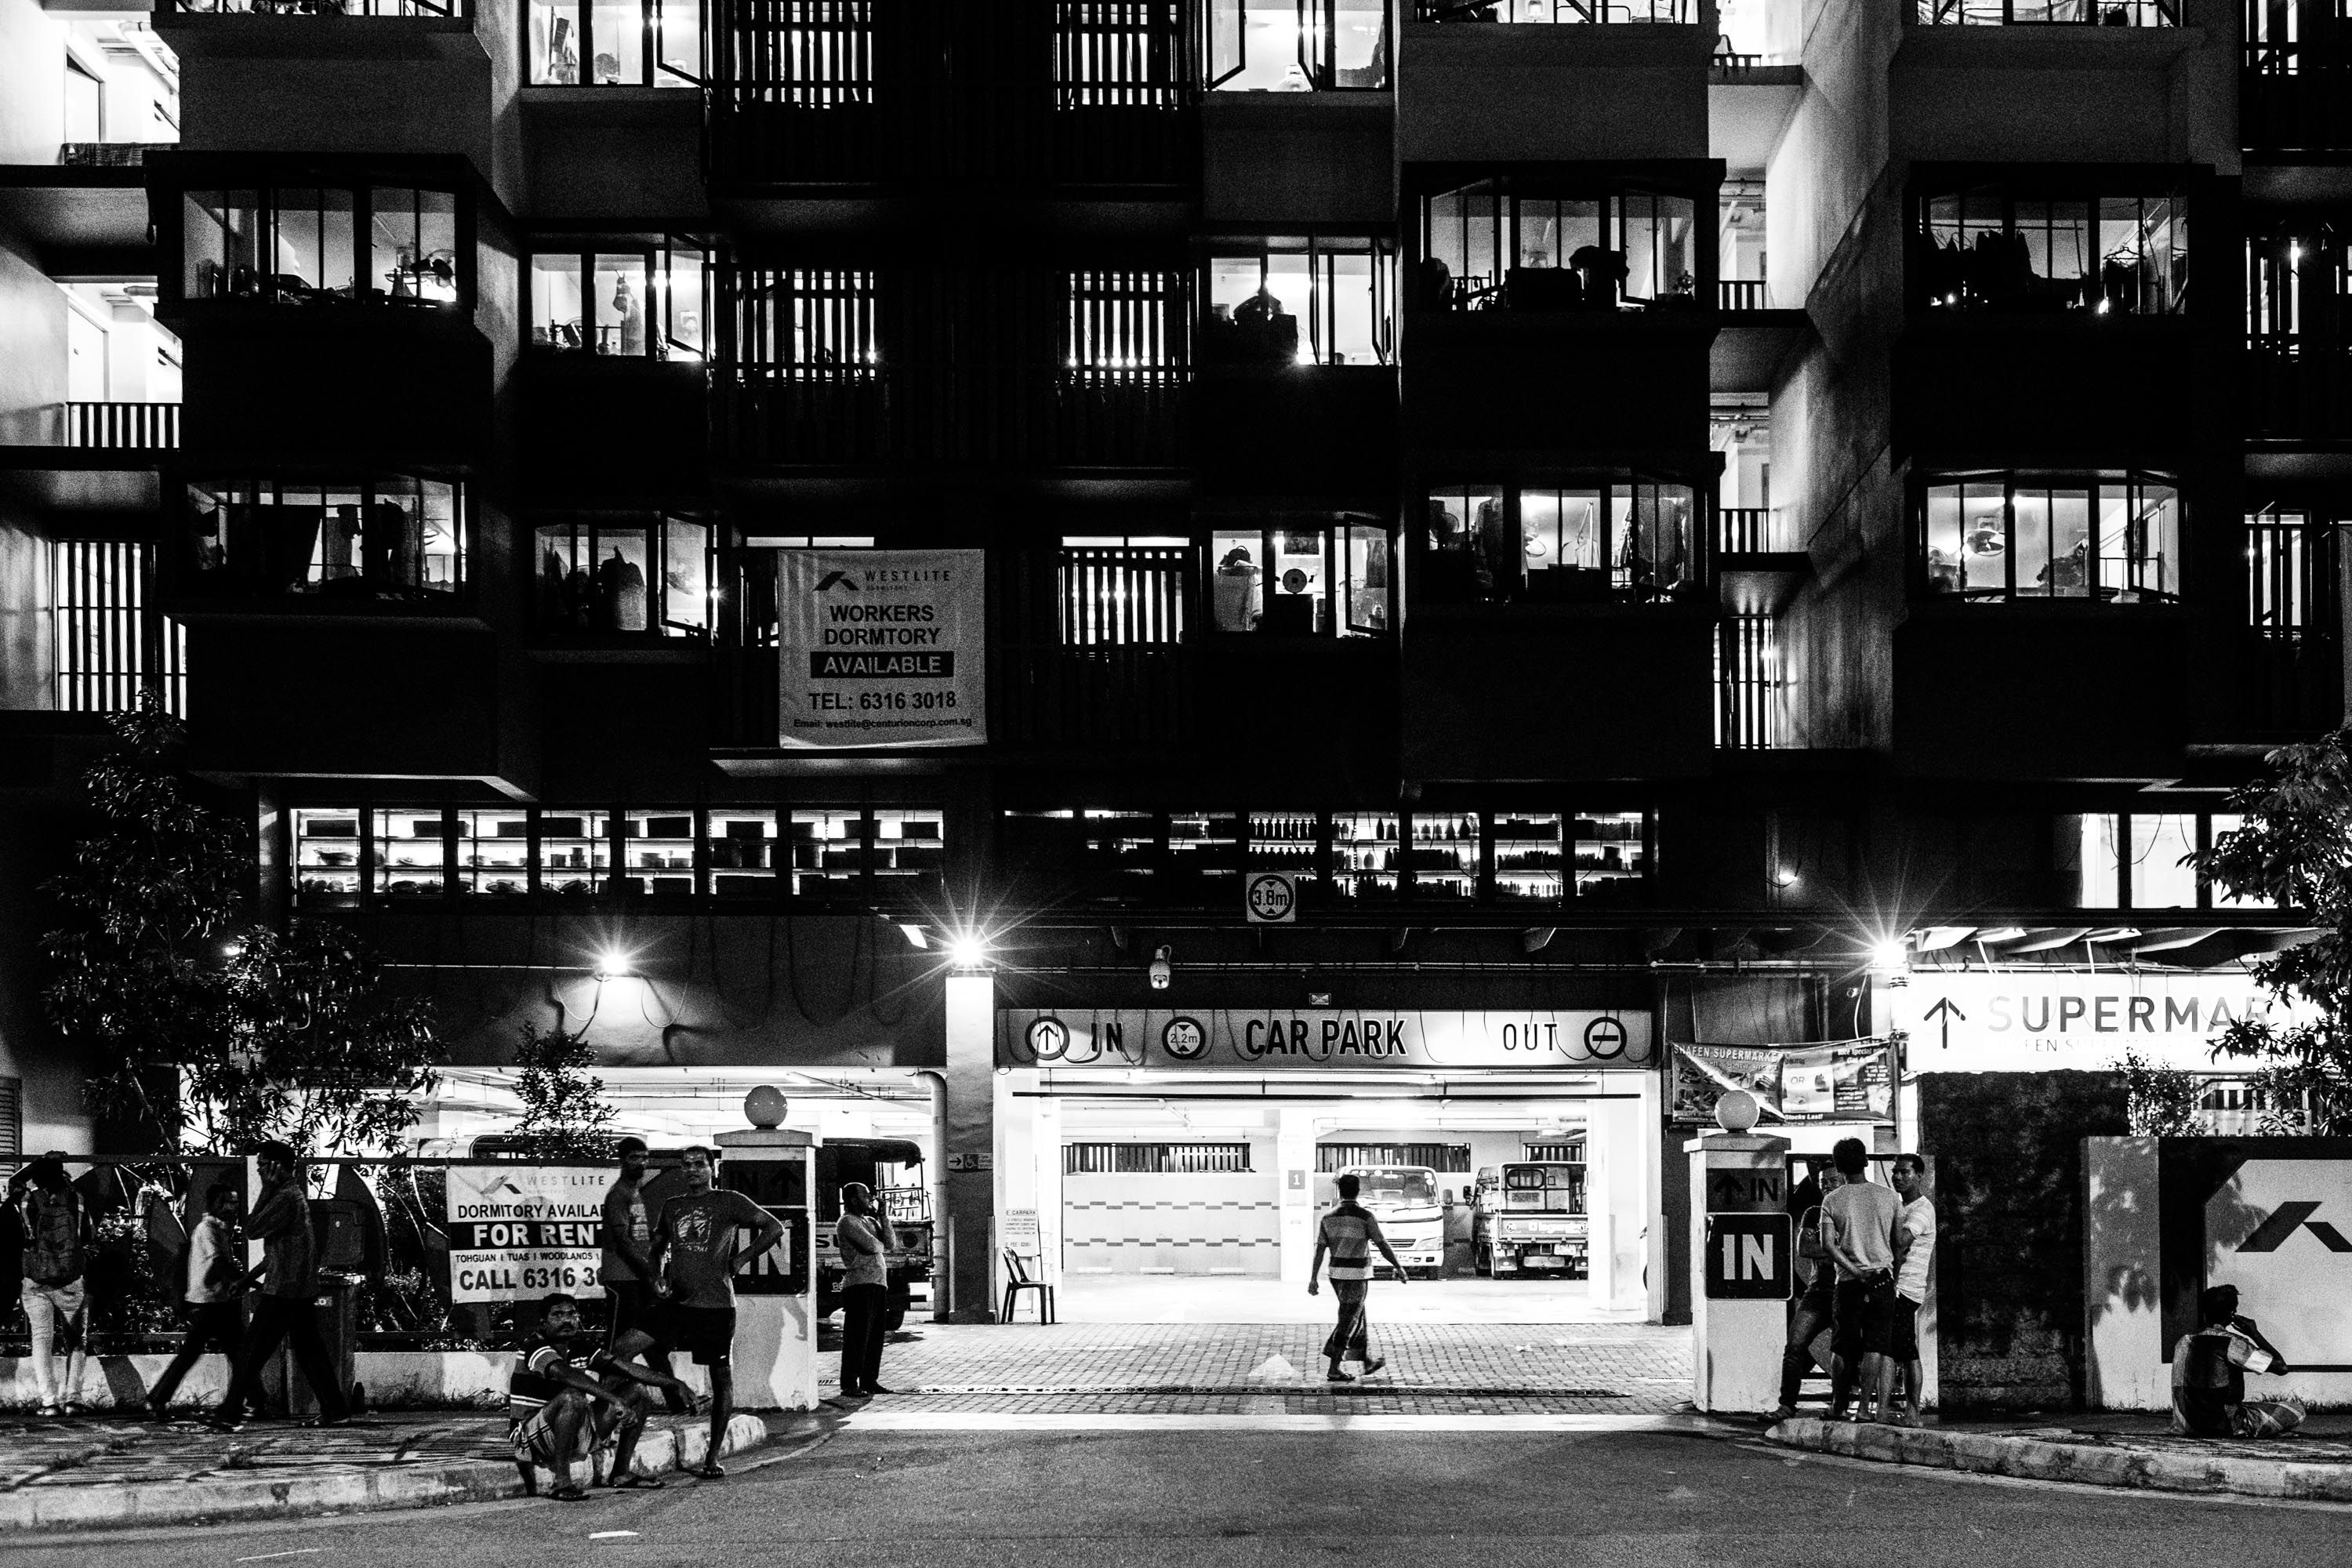 A workers dormitory in Jurong, Singapore where Mr. Haque and his friends live. The dormitories are provided by companies that hire construction workers. Image by Xyza Bacani. Singapore, 2016.